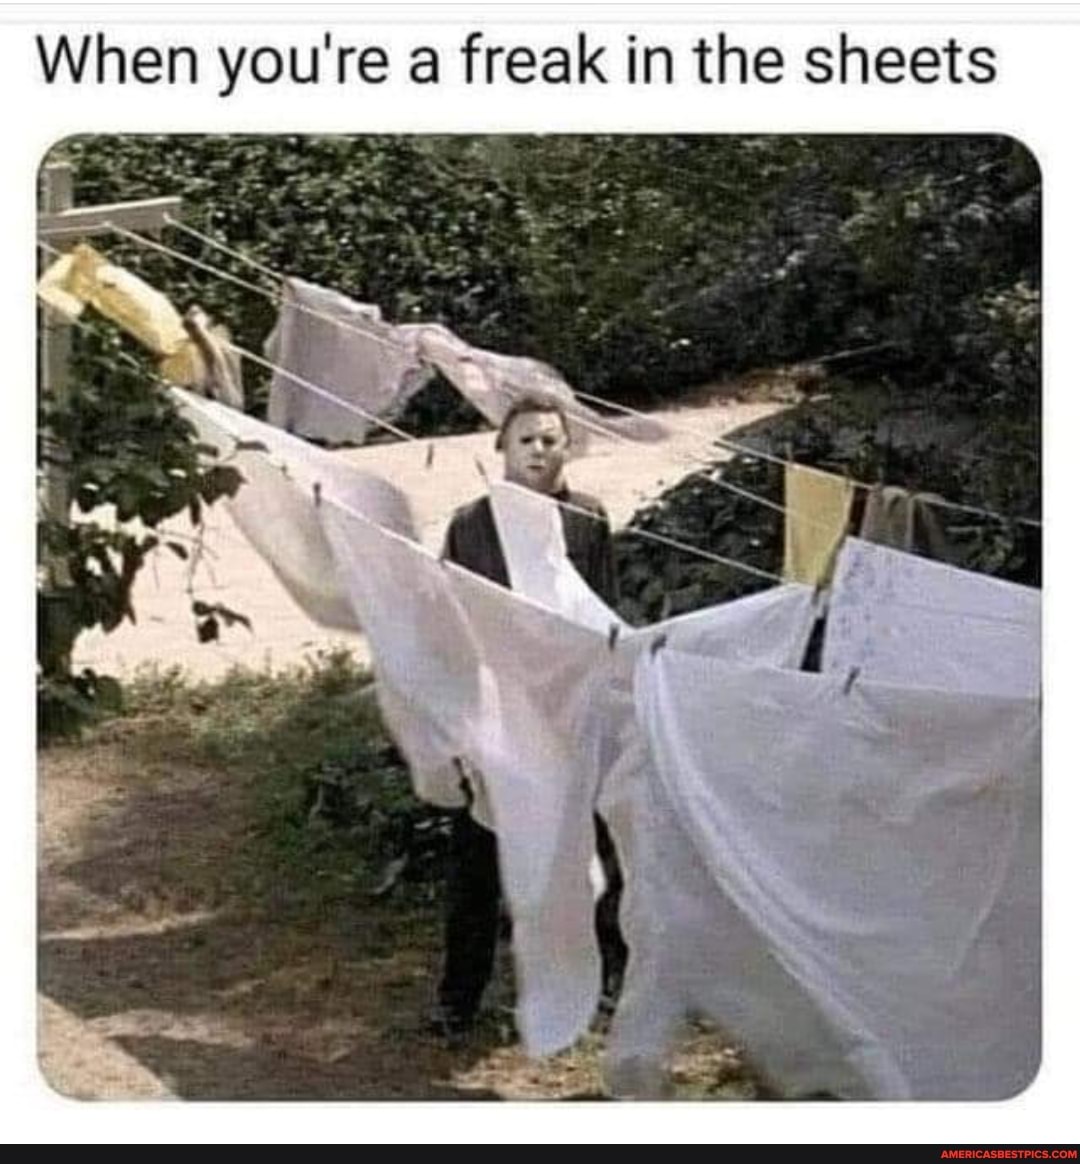 In sheets freaks the What does